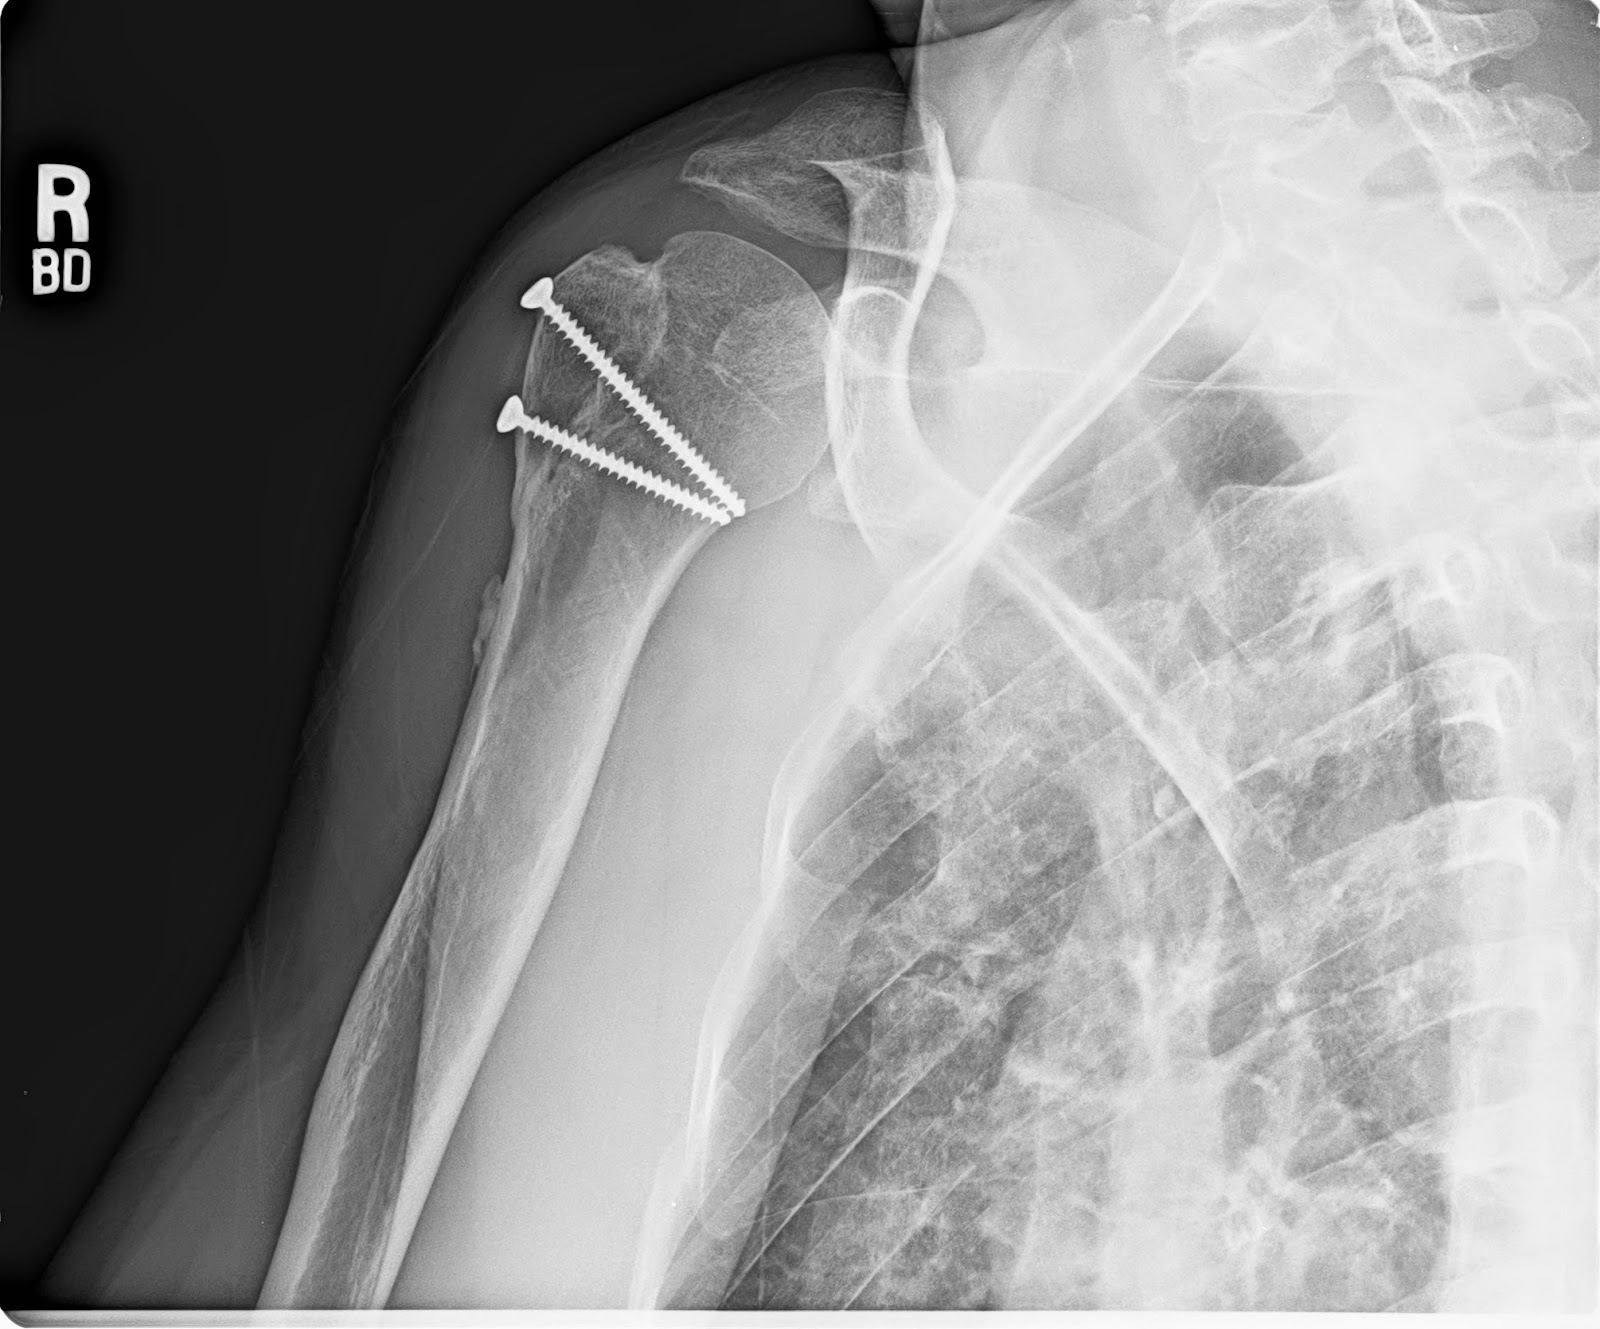 Comminuted fracture greater tuberosity humerus - virinsights